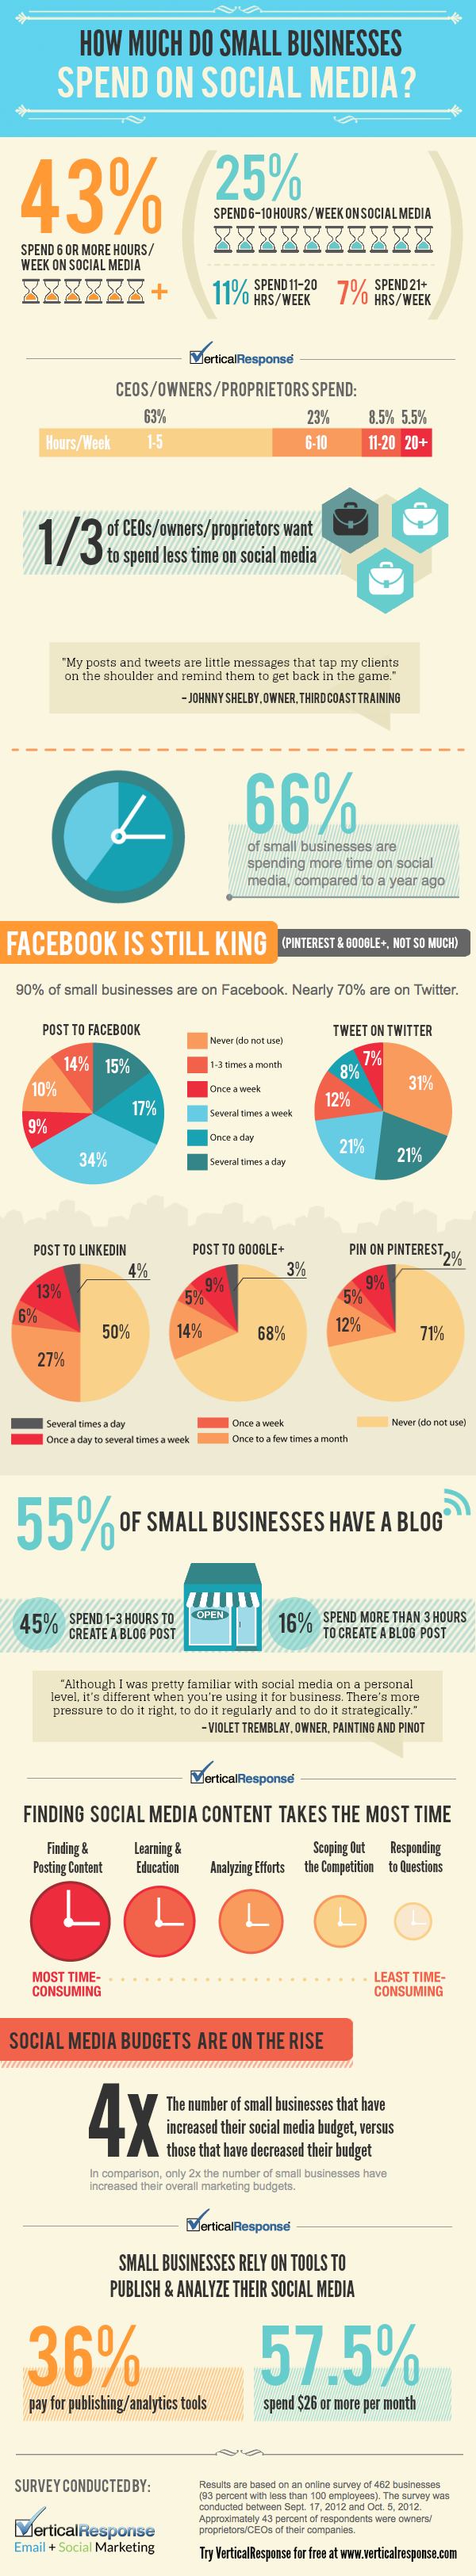 small-businesses-on-social-media